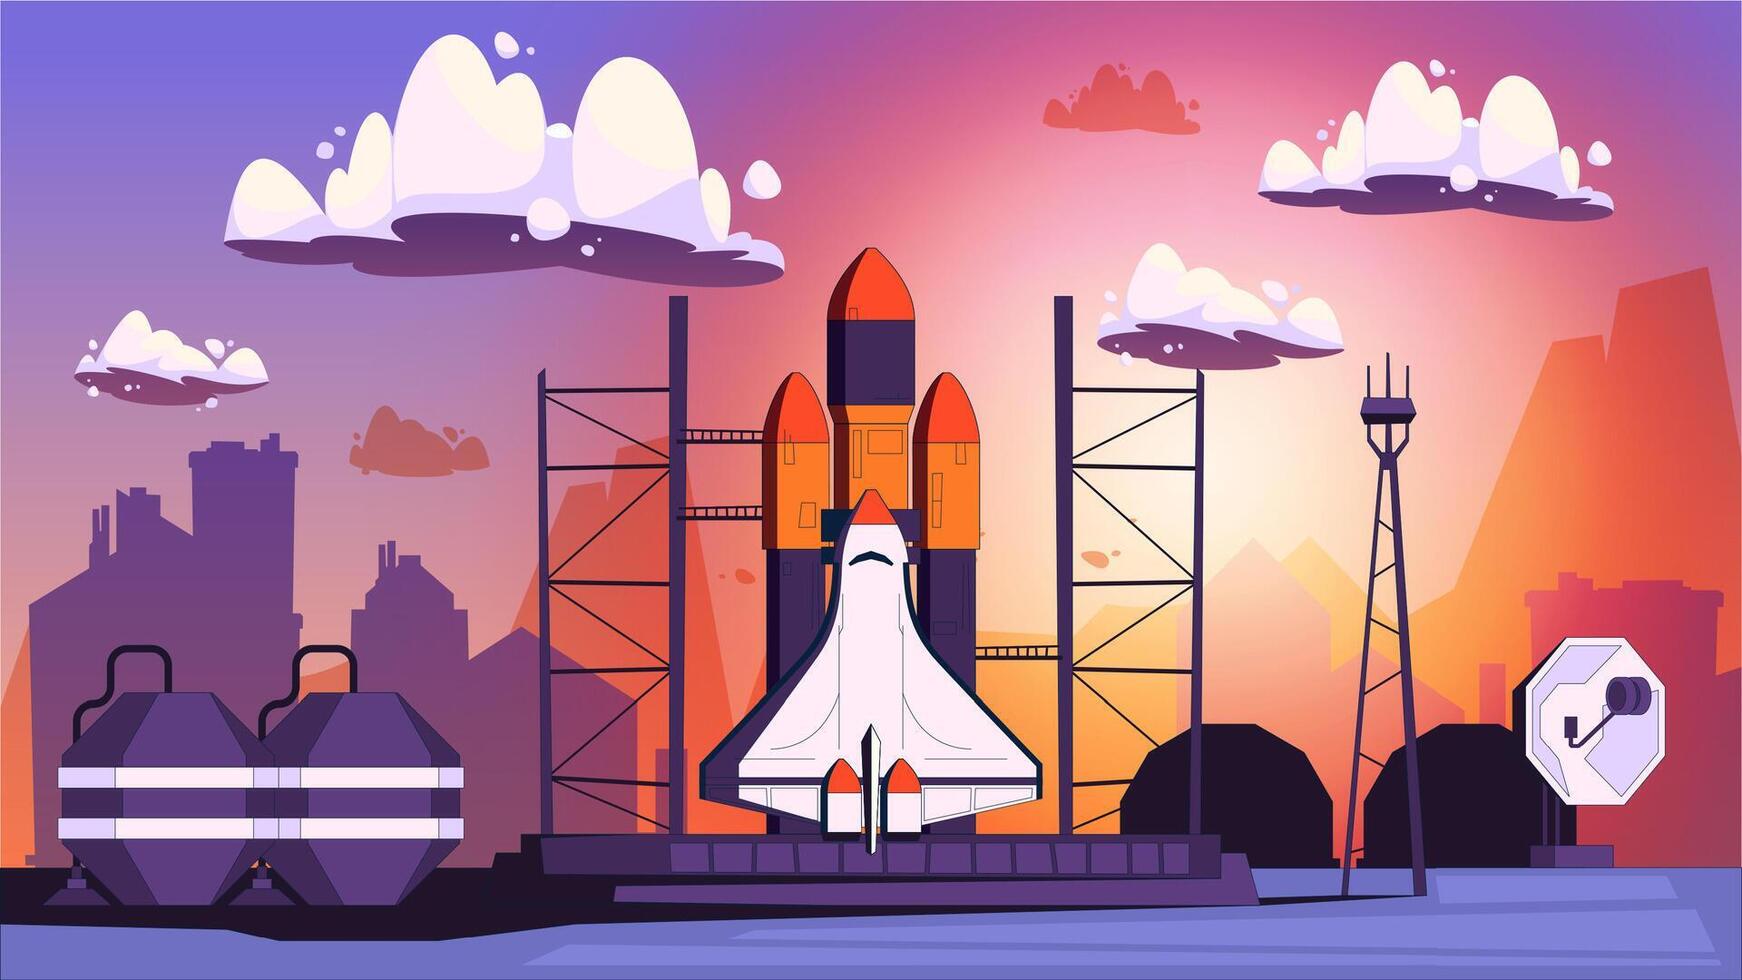 Space rocket launch composition. Cartoon space shuttle with crew and cargo rocket, space exploration concept background. Vector illustration